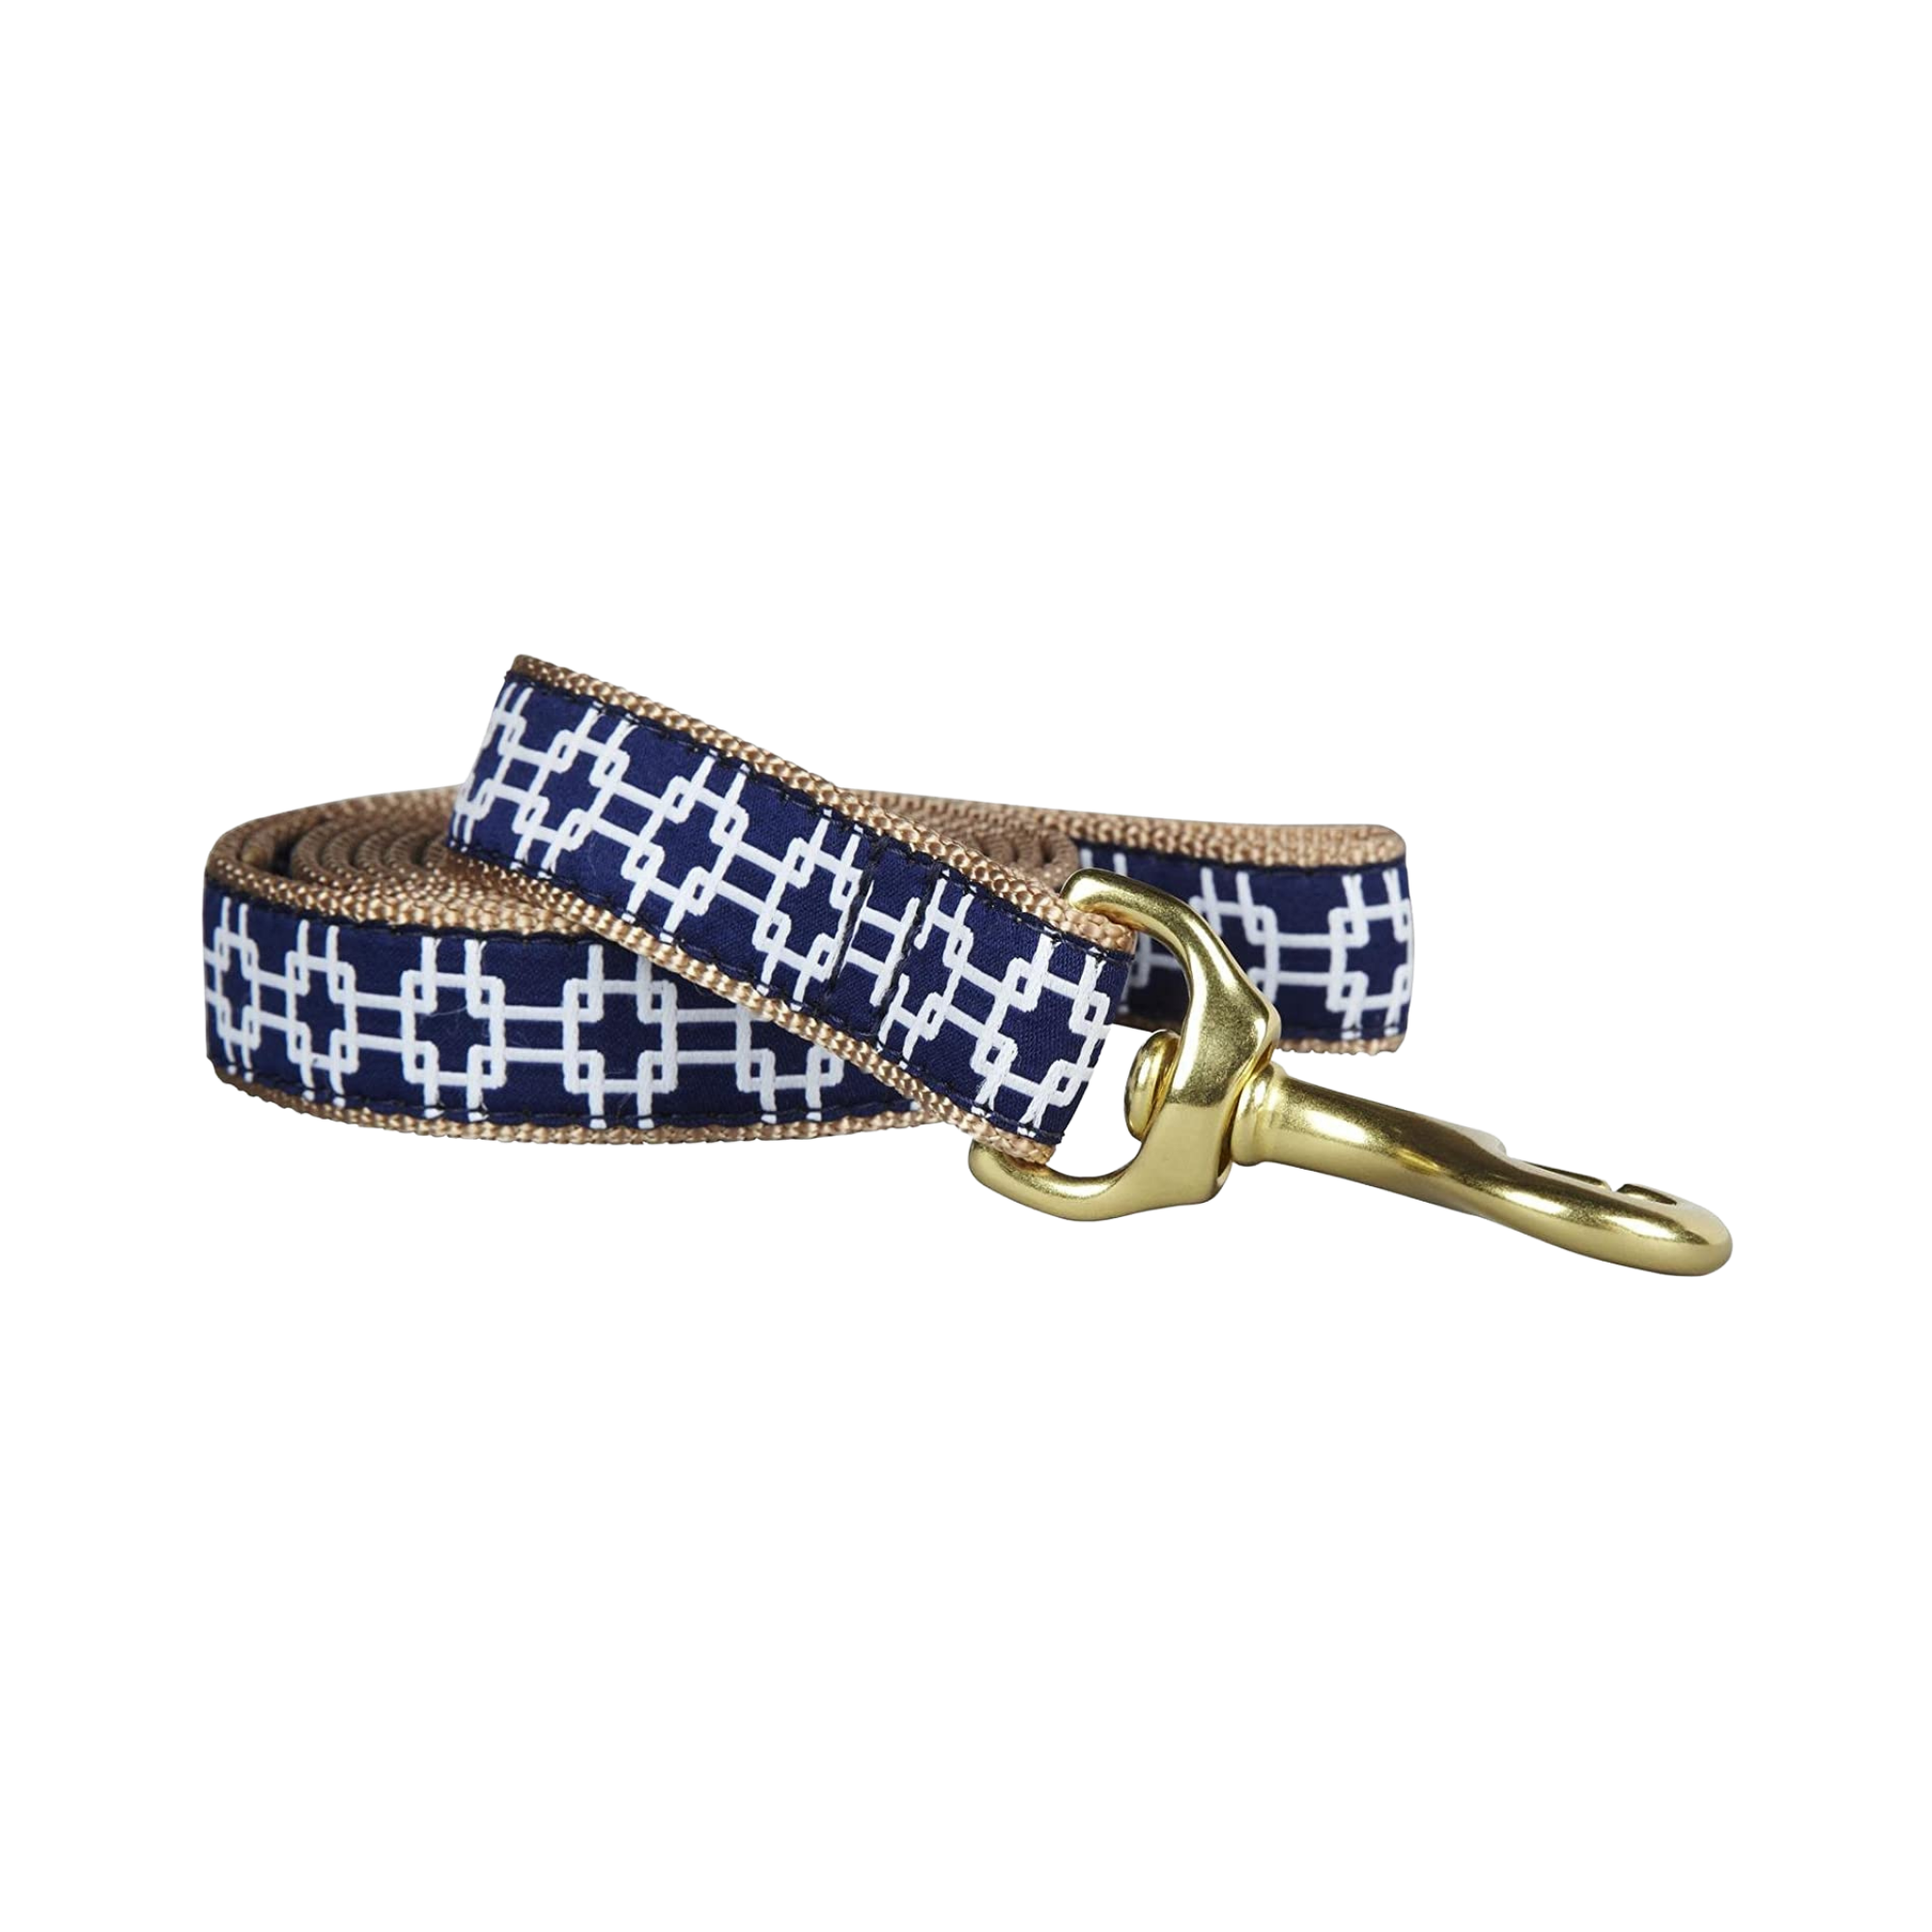 Up Country Gridlock Dog Lead - Mutts & Co.